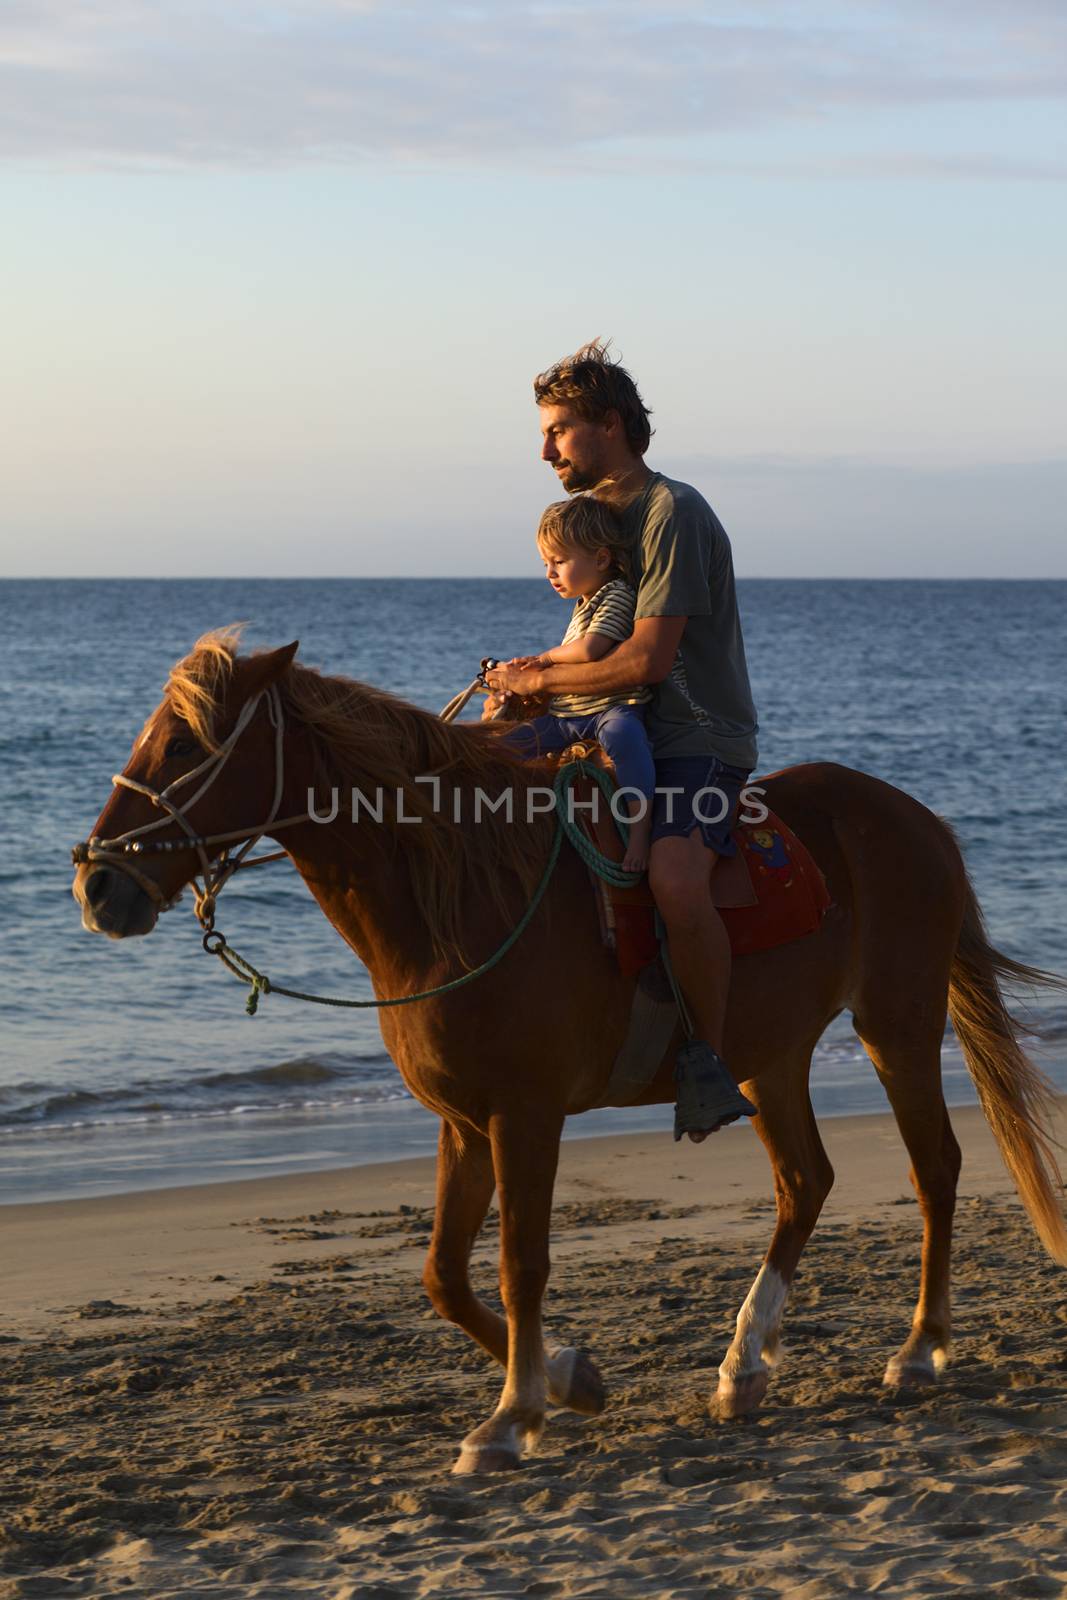 MANCORA, PERU - AUGUST 20, 2013: Unidentified young man and child on horseback on the beach lit by the setting sun on August 20, 2013 in Mancora, Peru. Mancora is a popular beach town in Peru for both Peruvian and foreign tourists.   